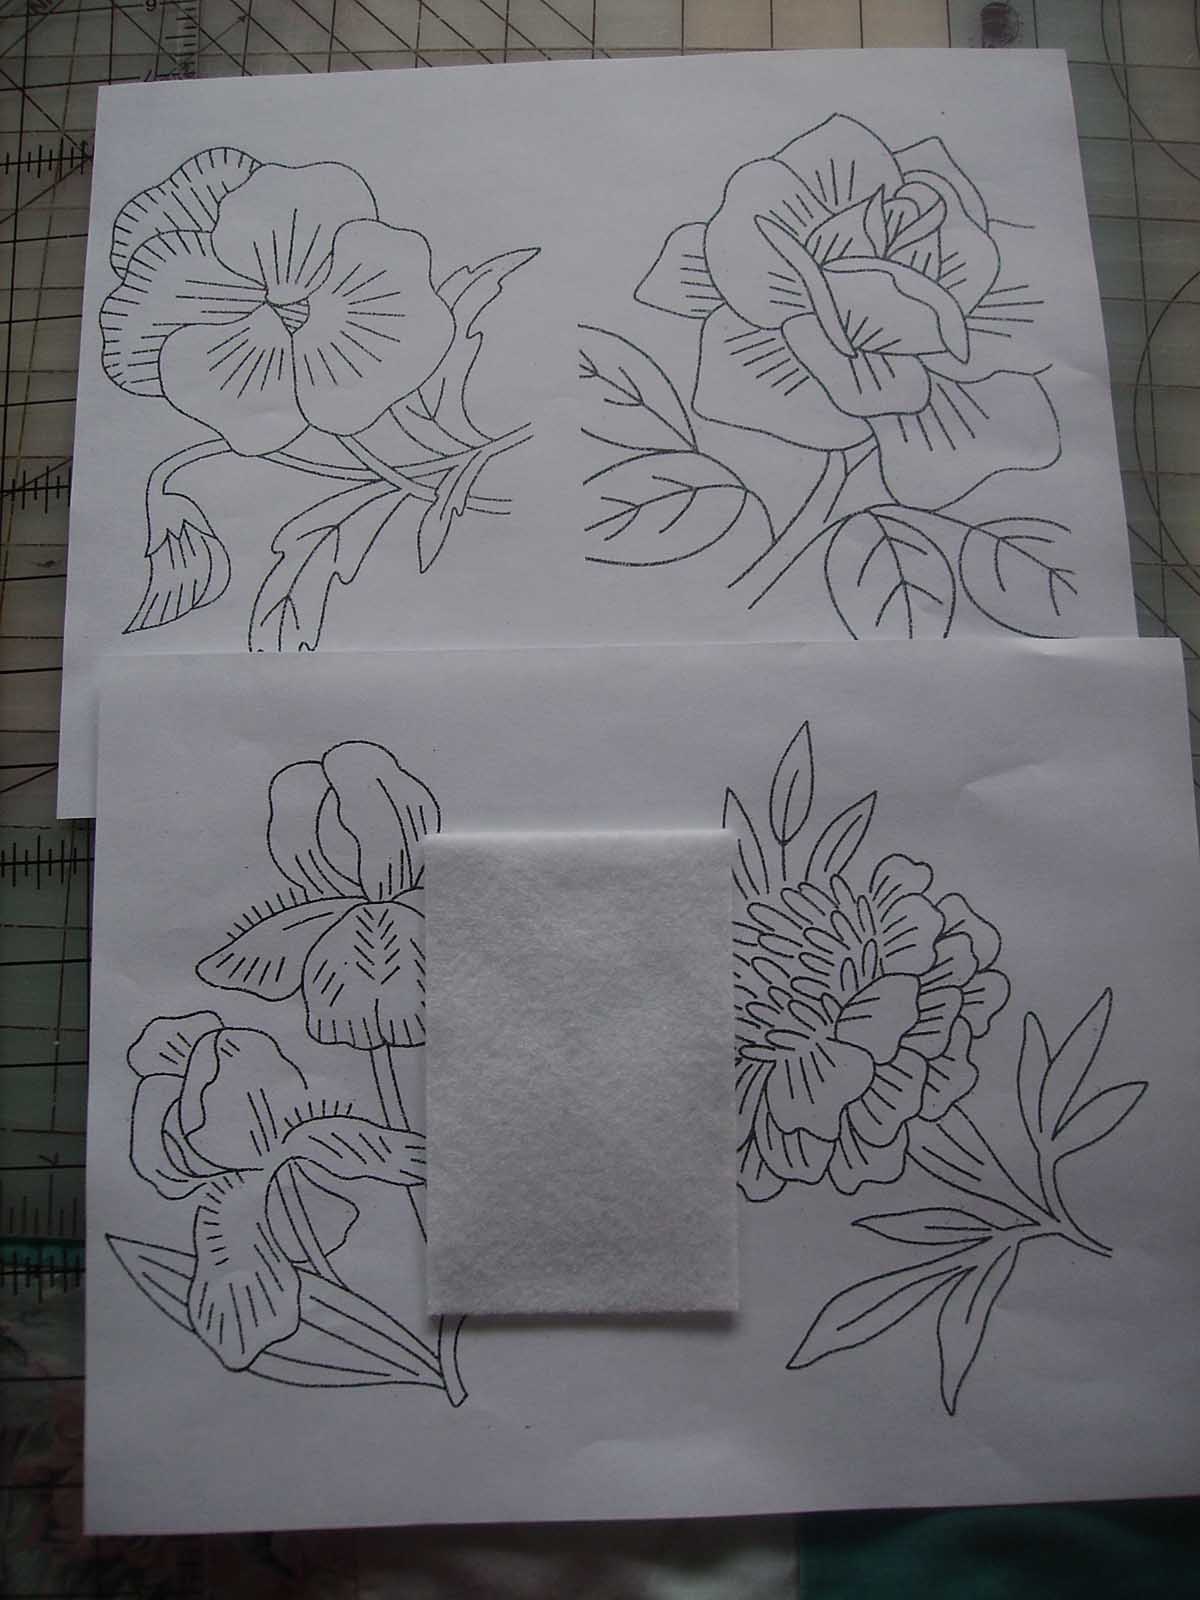 How to Use Transfer Paper for Embroidery | eHow.com